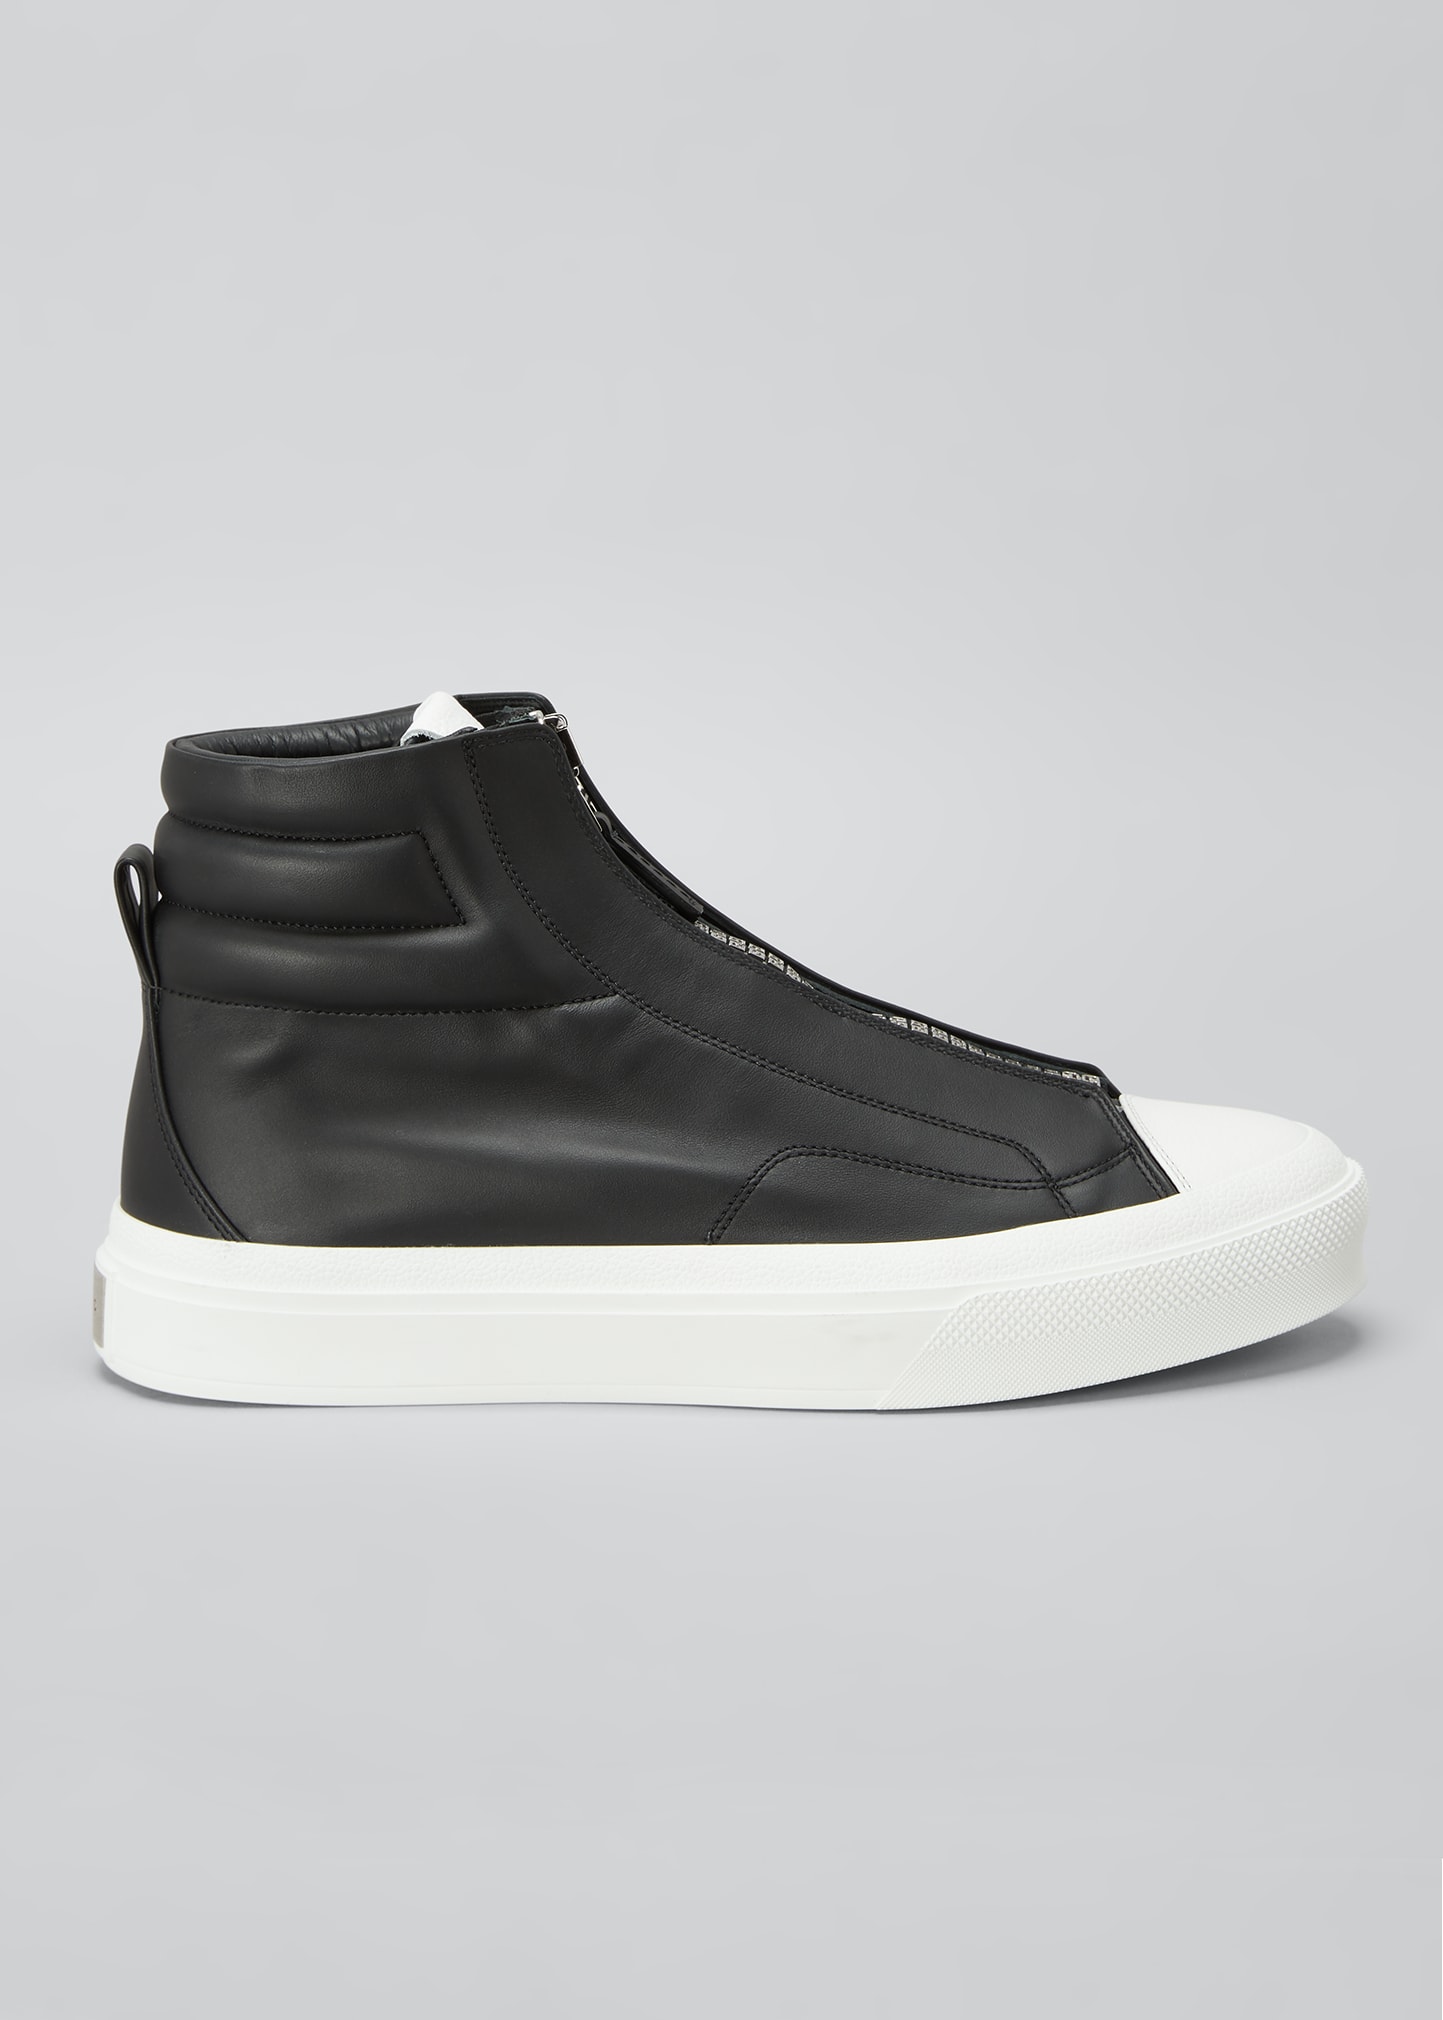 Givenchy Men's City 4G-Zip Leather High Top Sneakers | Smart Closet